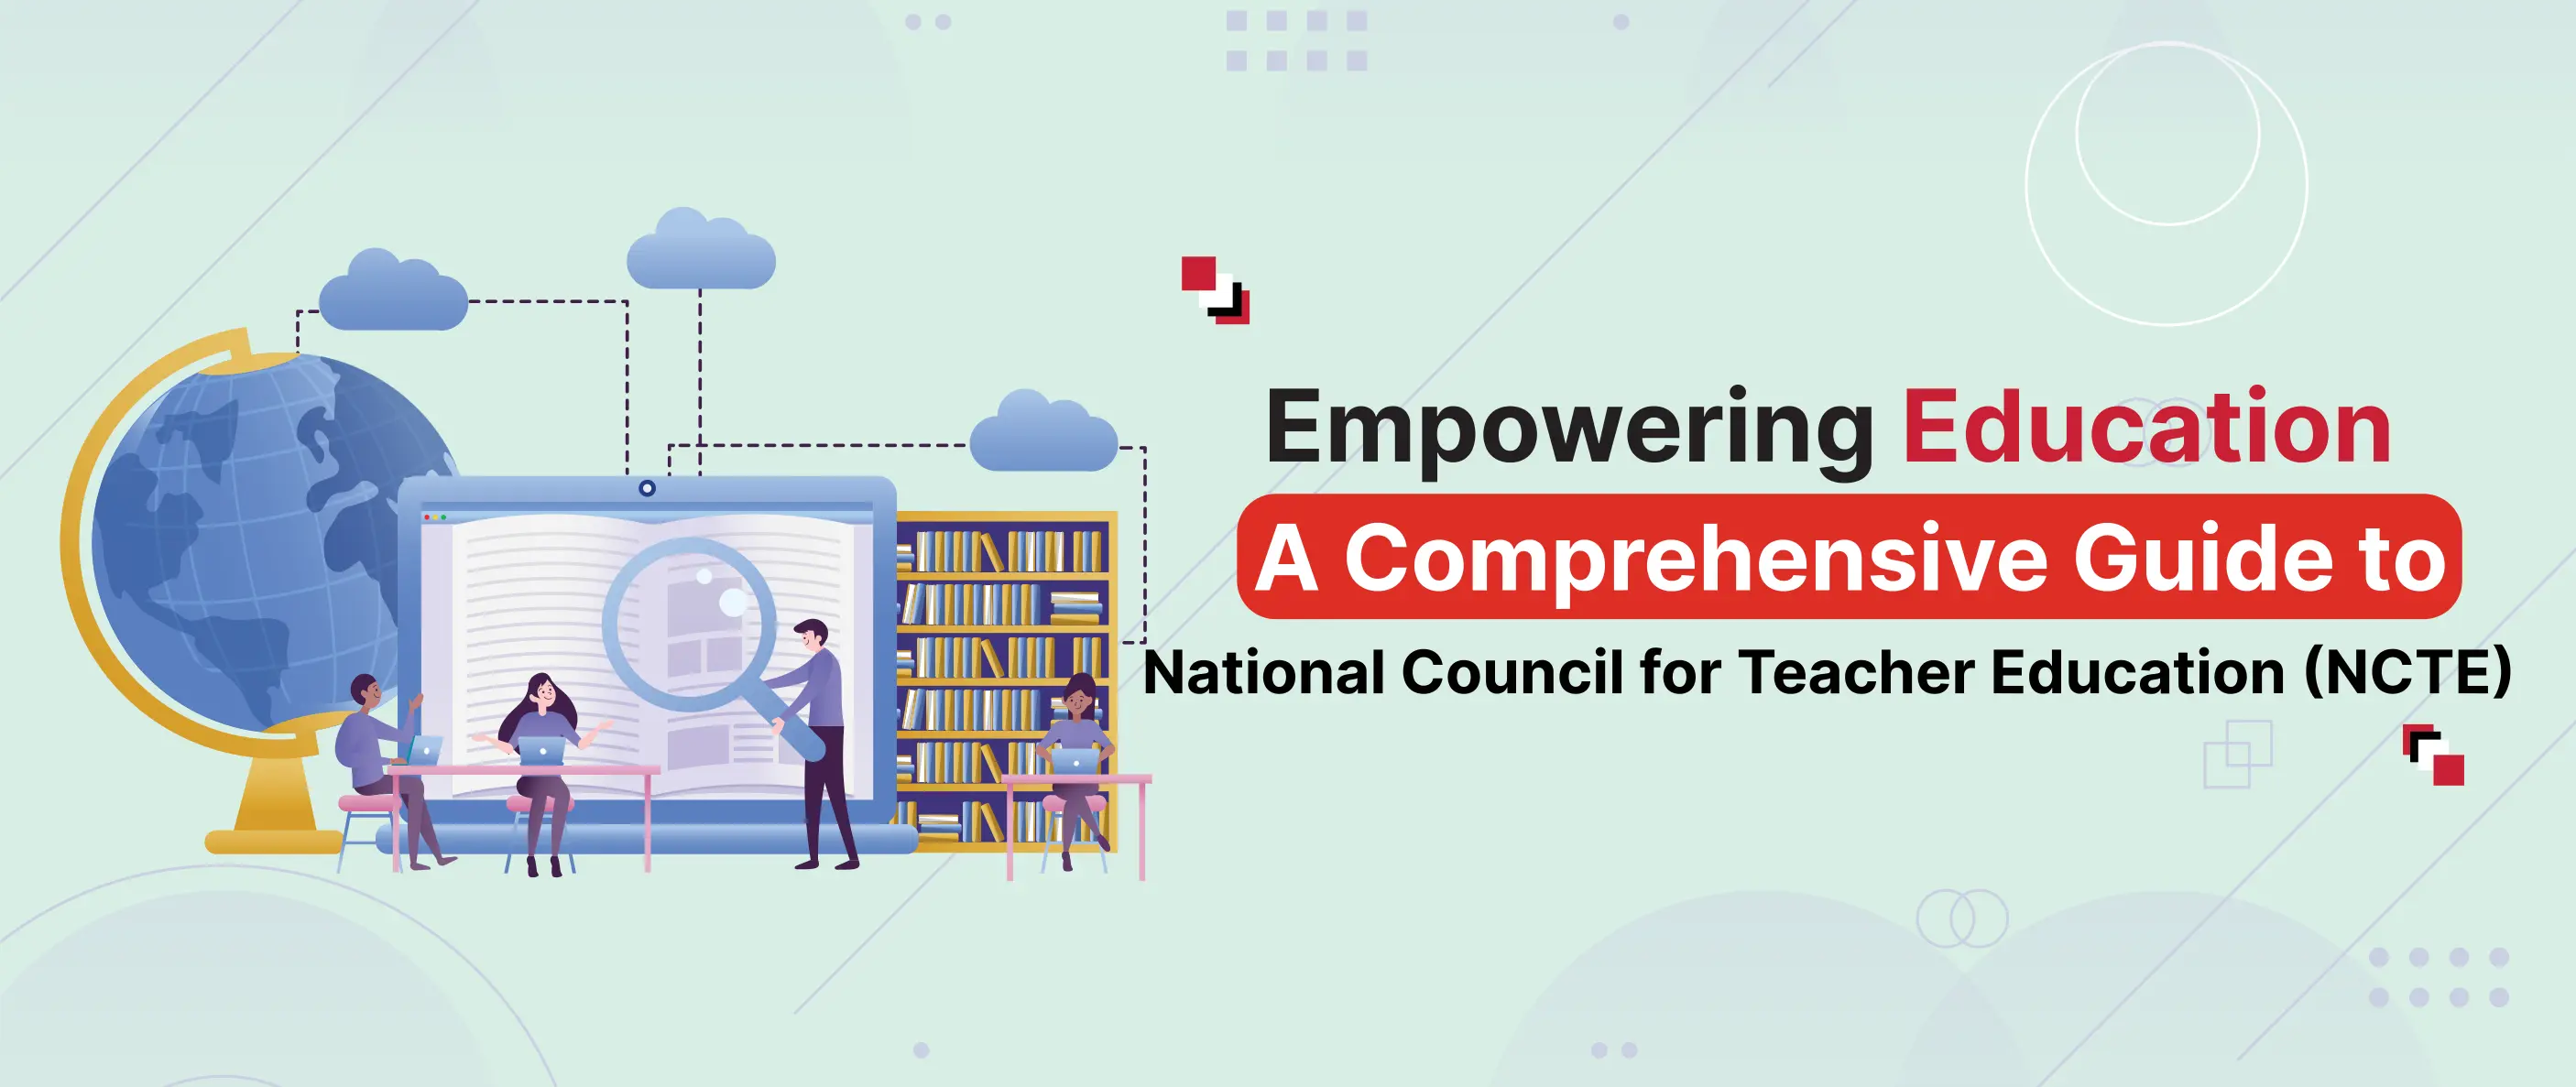 Empowering Education: A Comprehensive Guide to National Council for Teacher Education (NCTE)